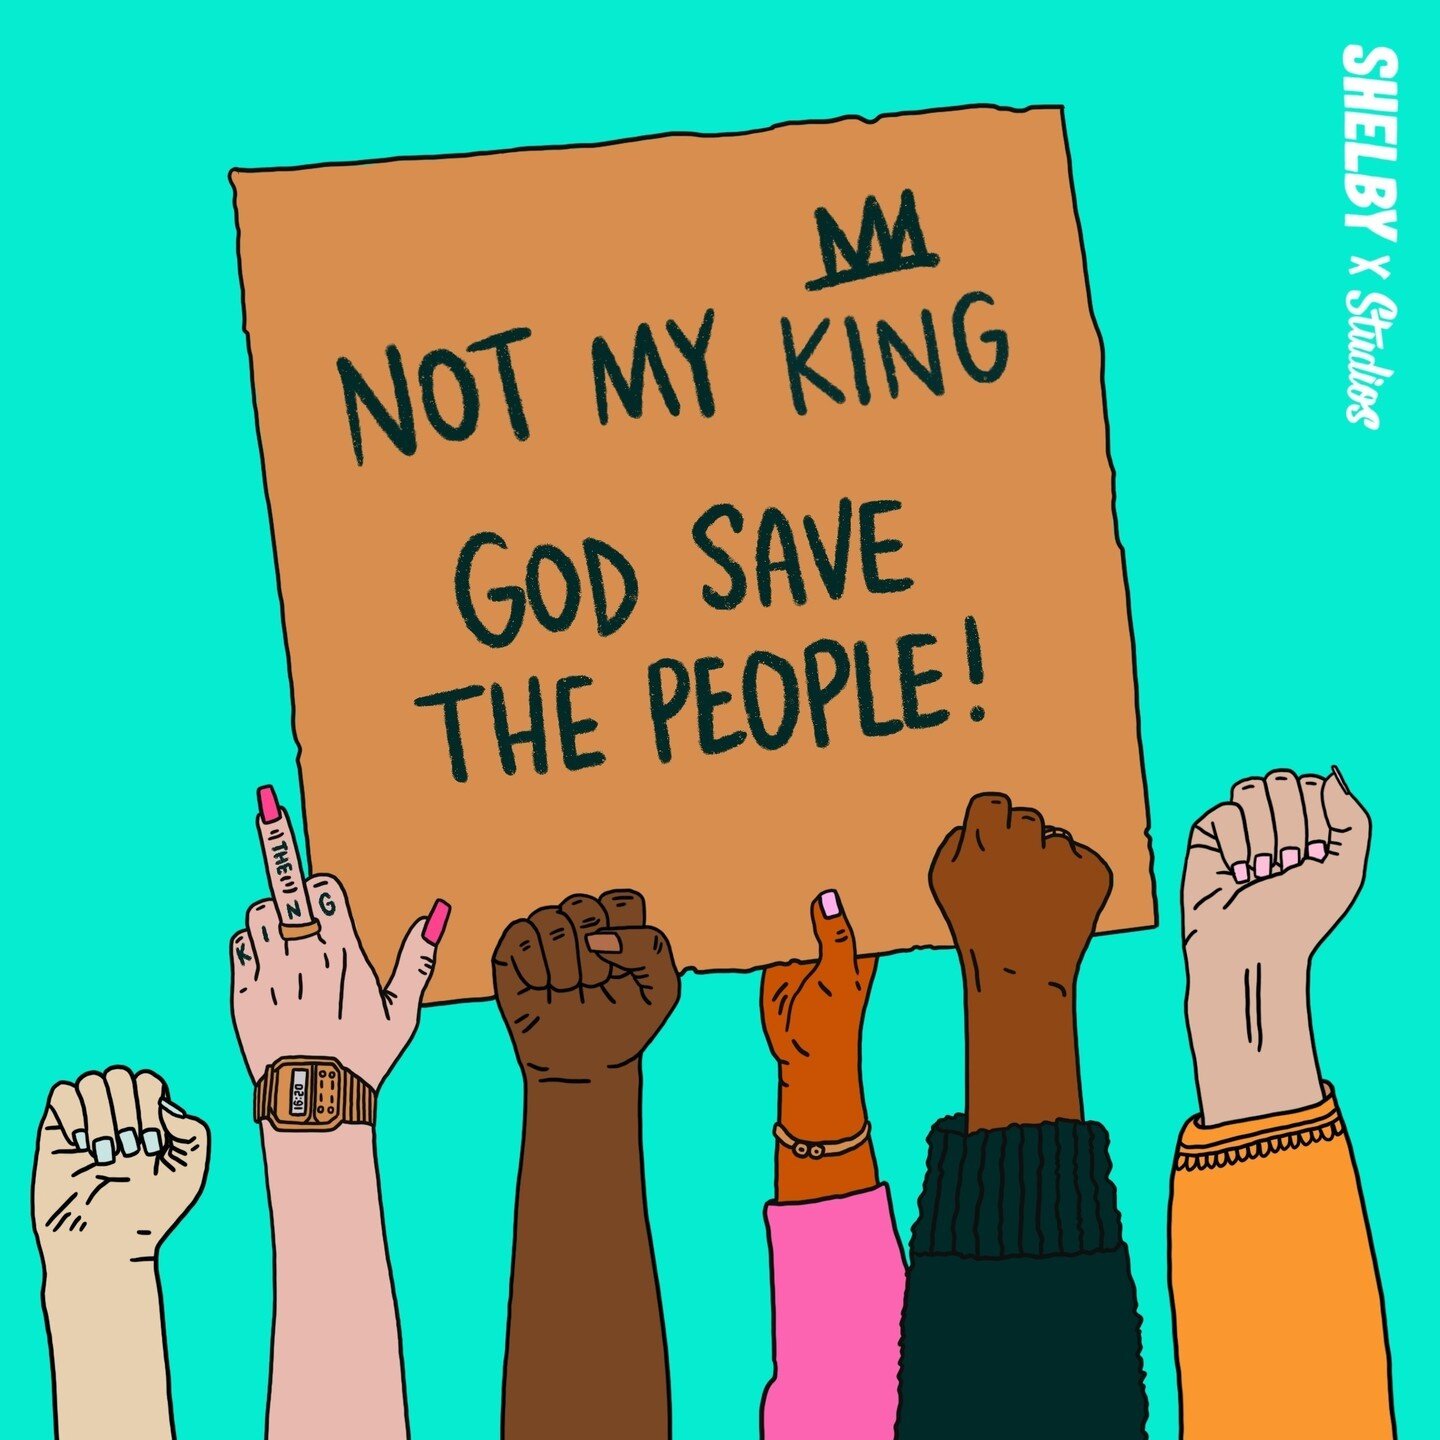 Not my king 👑 God save the people!⁠
⁠
Holding a taxpayer funded coronation ceremony, dripping in jewels and inherited wealth, as millions of people struggle through the reality of Capitalism in crisis is actually disgusting. ⁠
⁠
The use of food bank